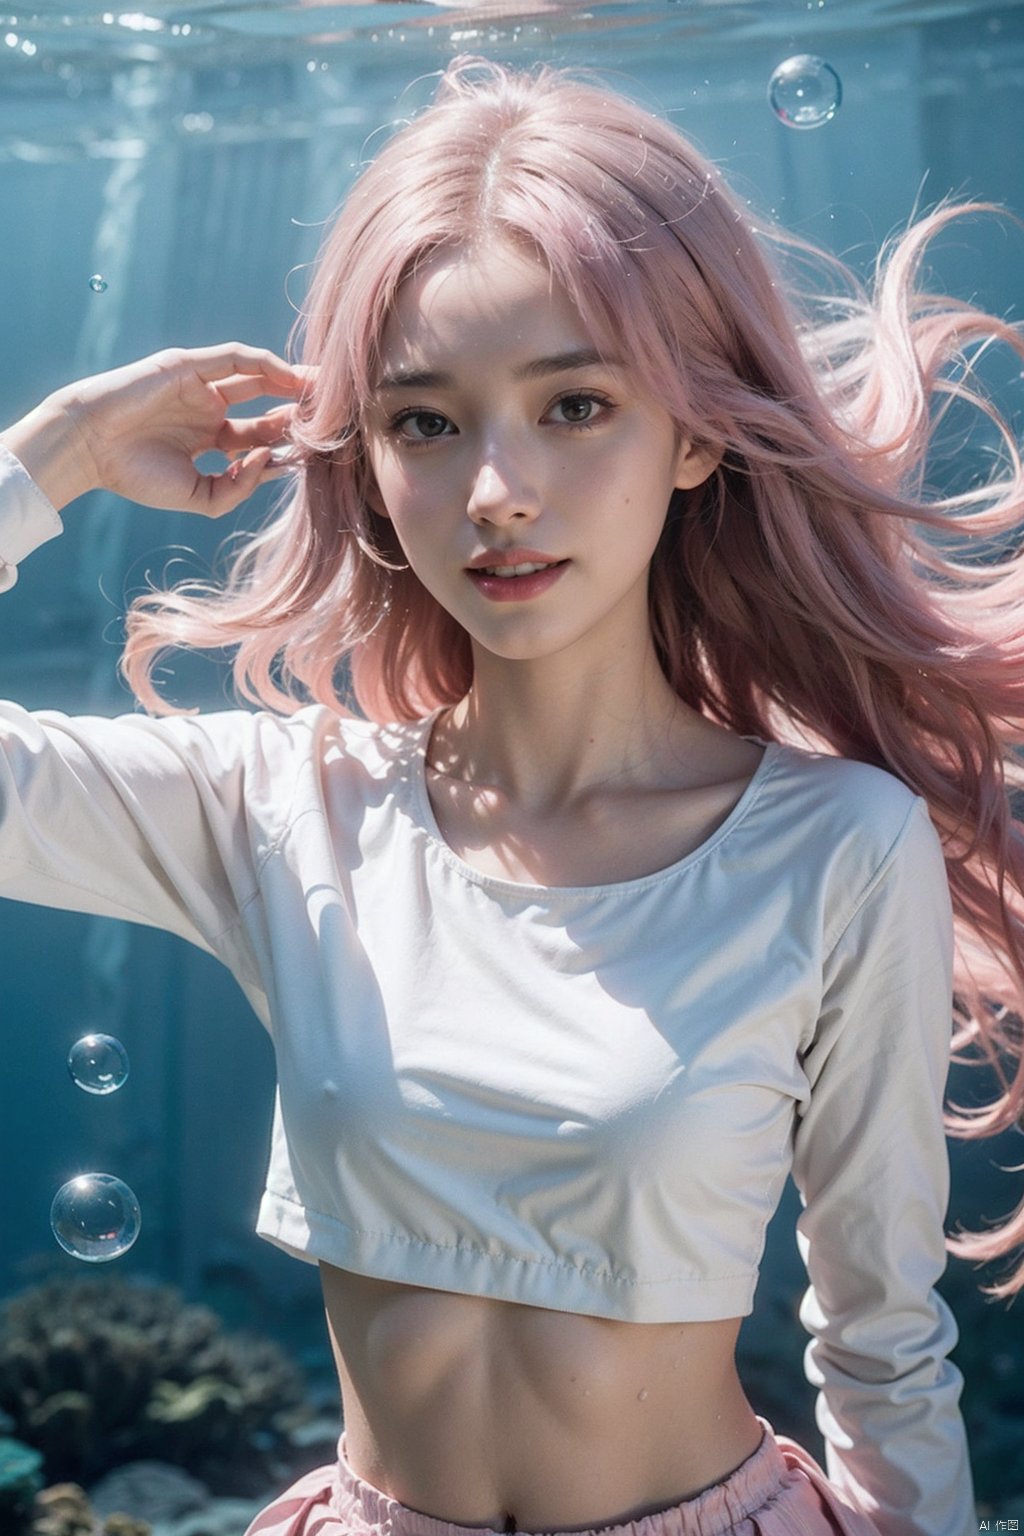  In the photo, the girl is floating underwater, smiling at the camera, grin, surrounded by foam, Body glow, Arms outstretched, (wide Angle, Low Angle, Underwater, bubble, foam, Super long pink hair floating in the water, upper body:1.5), white top, pleated skirt, Small black leather shoes and White cotton socks, lean forward, long sleeves, brown eyes, mini skirt, Water, In the pool, swimming, HDR, Vibrant colors, surreal photography, highly detailed, masterpiece, ultra high res, high contrast, mysterious, cinematic, fantasy, bright natural light,